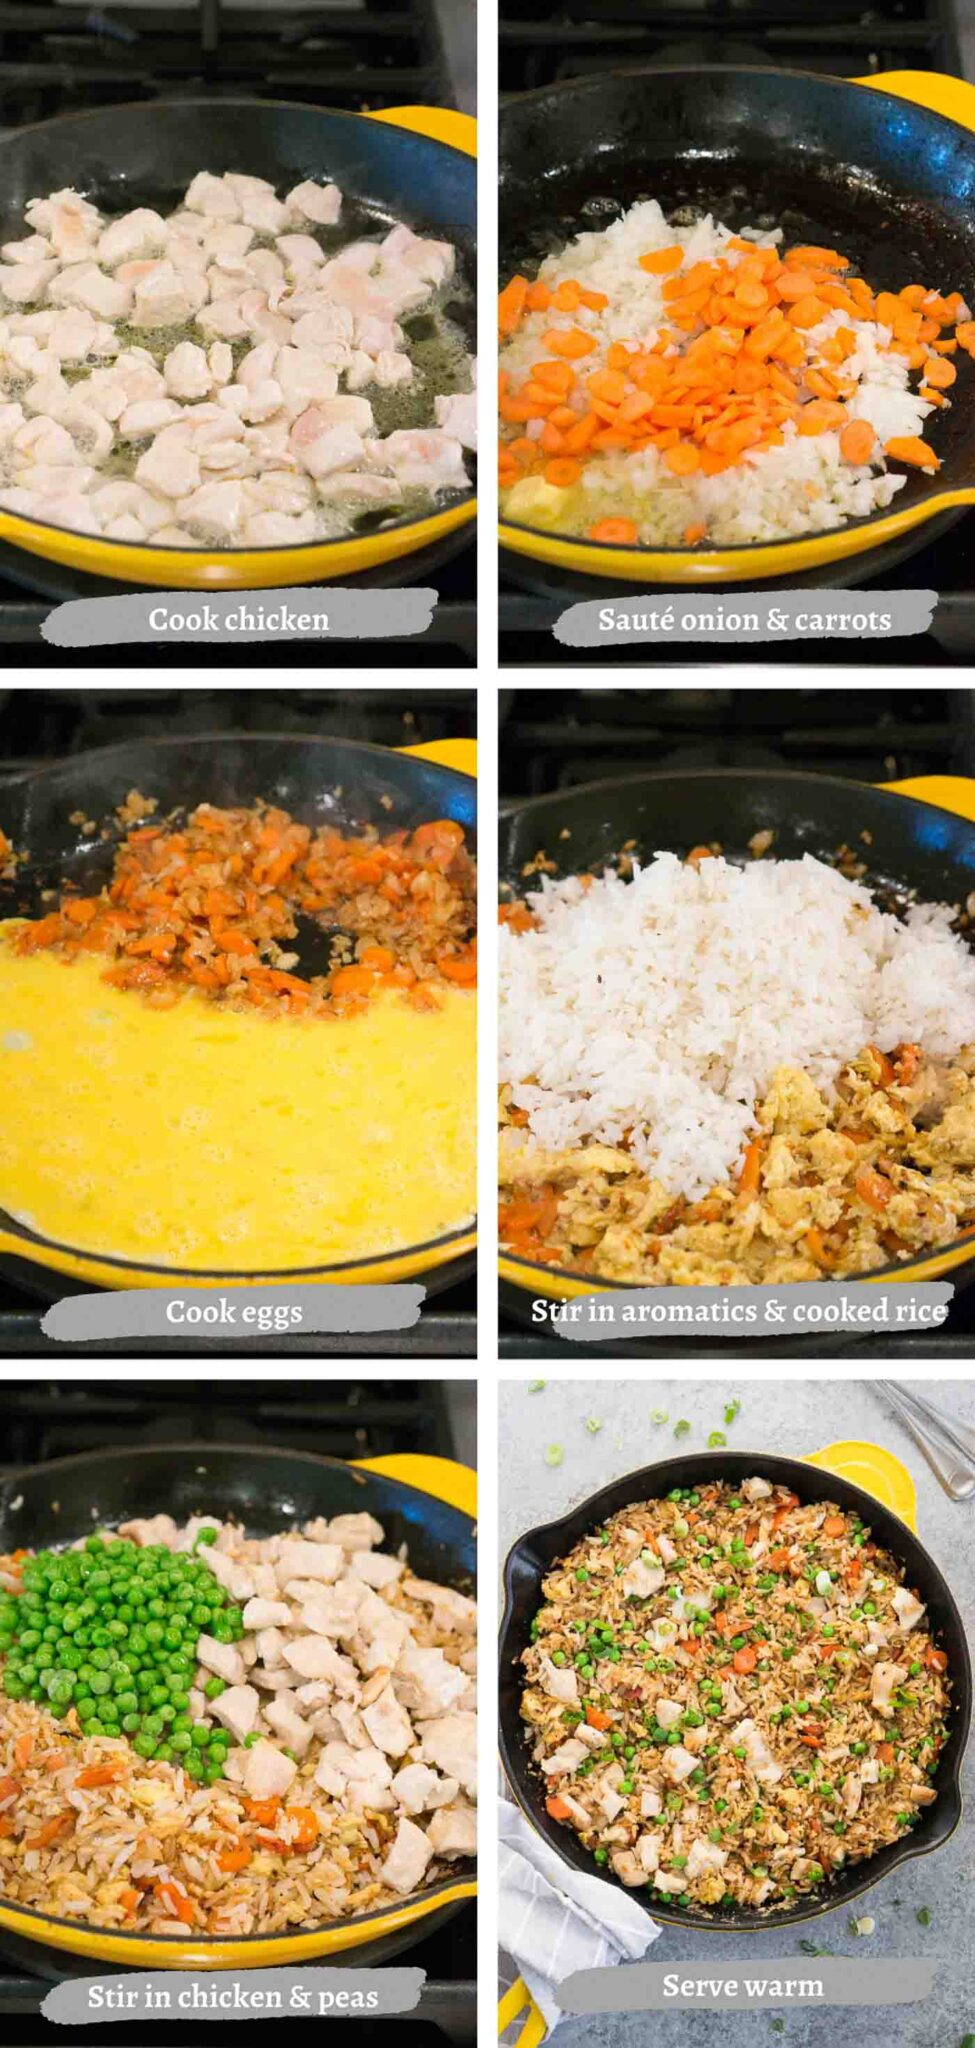 process images of making fried rice and chicken